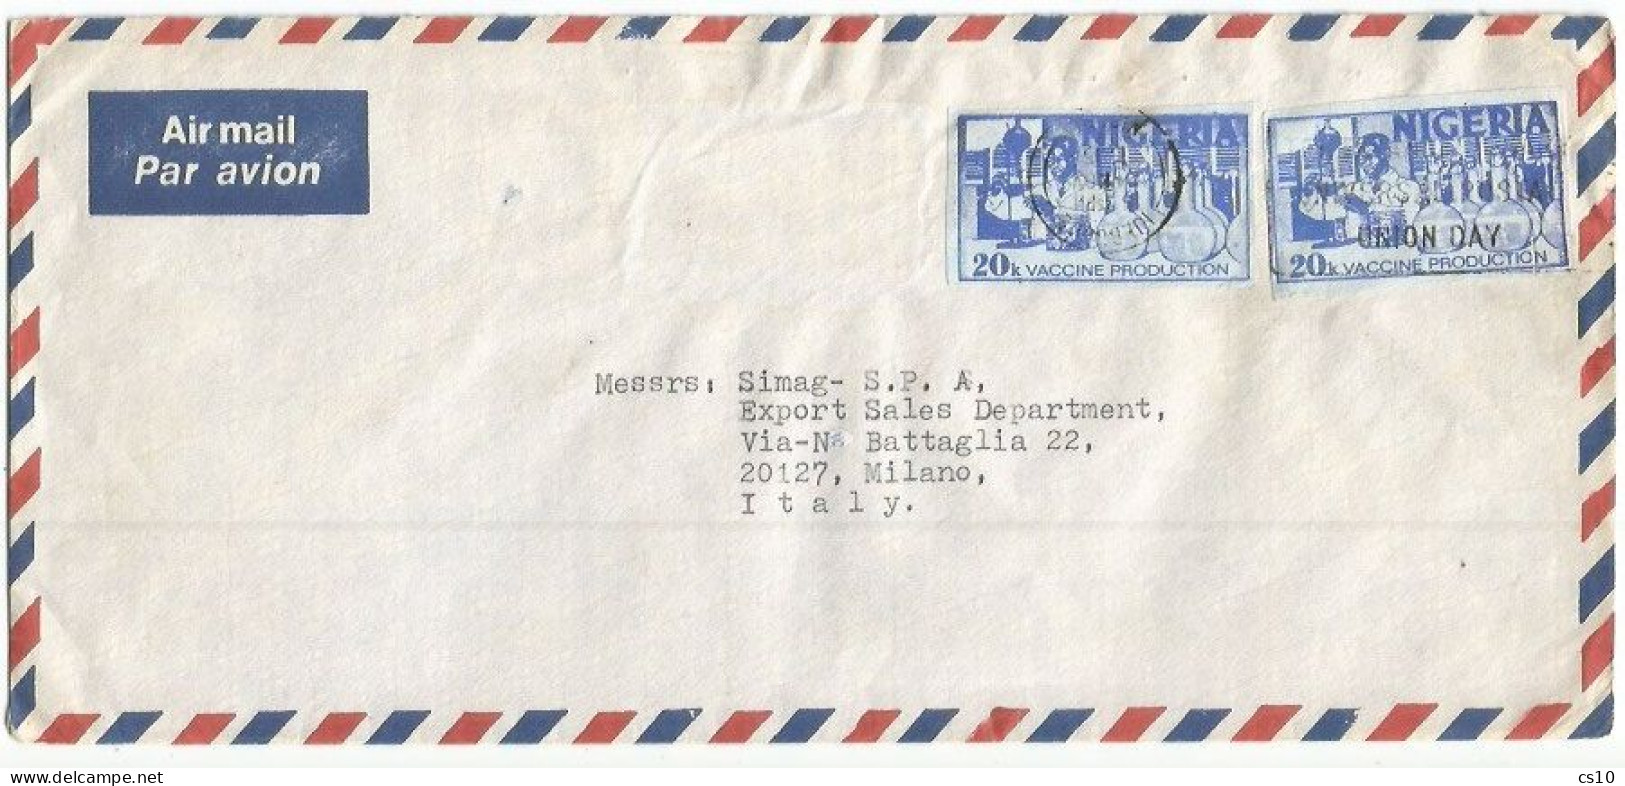 Nigeria Commerce Airmail Cover Ijebu-Ode 21nov1985 Nicely Franked With #2 Square Cuts From Aerogramme 20k + 20k To Italy - Nigeria (1961-...)